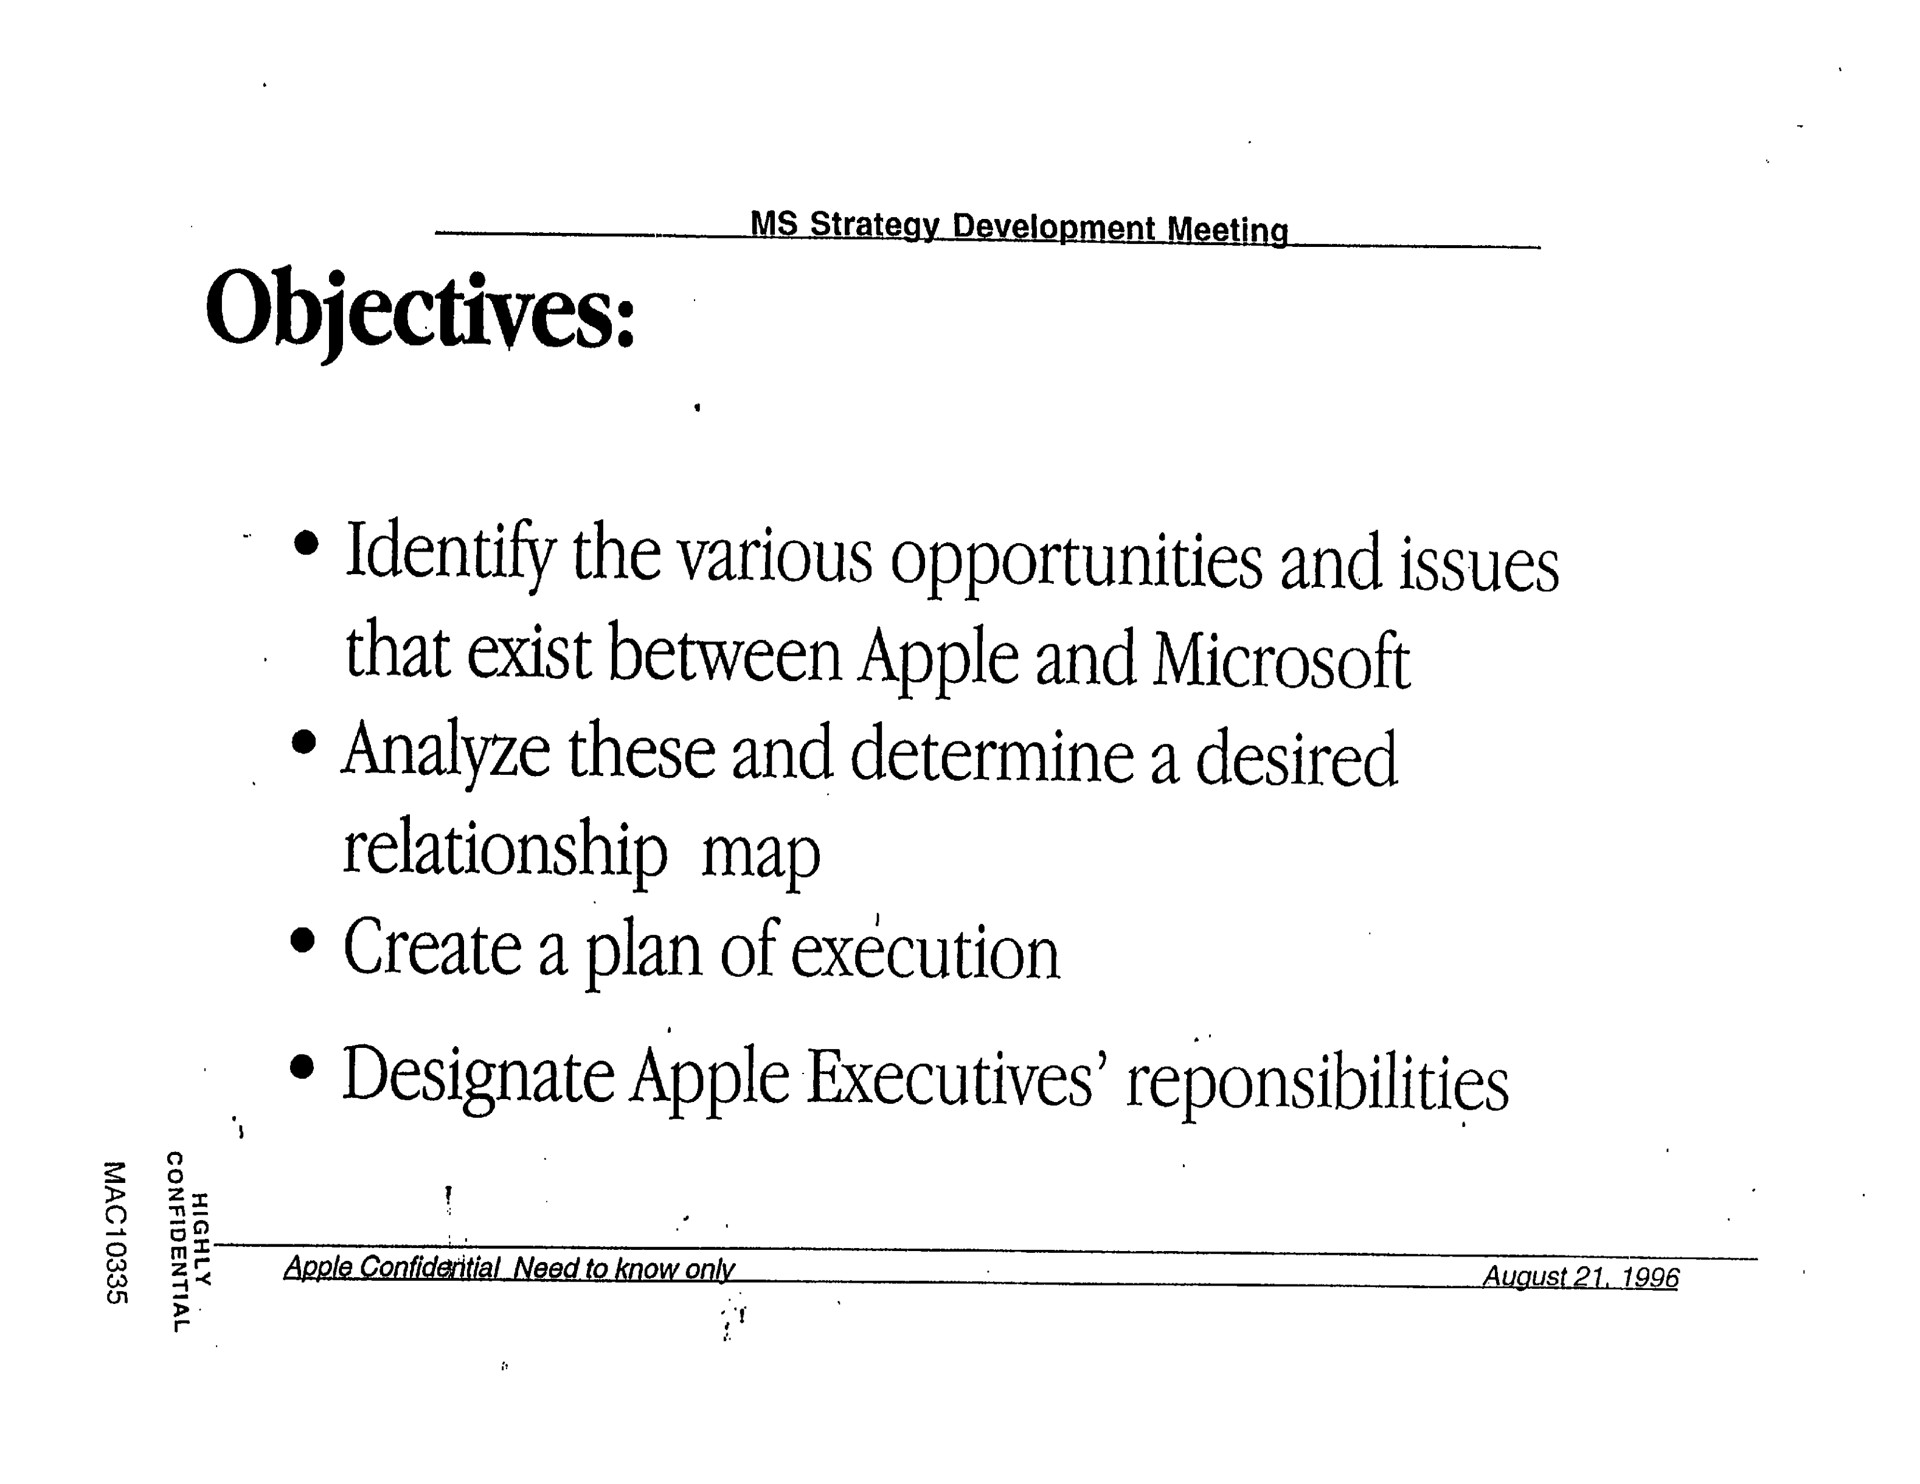 objectives identify the various opportunities and issues that exist between apple and analyze these and determine a desired relationship map create a plan of execution designate apple executives | Apple